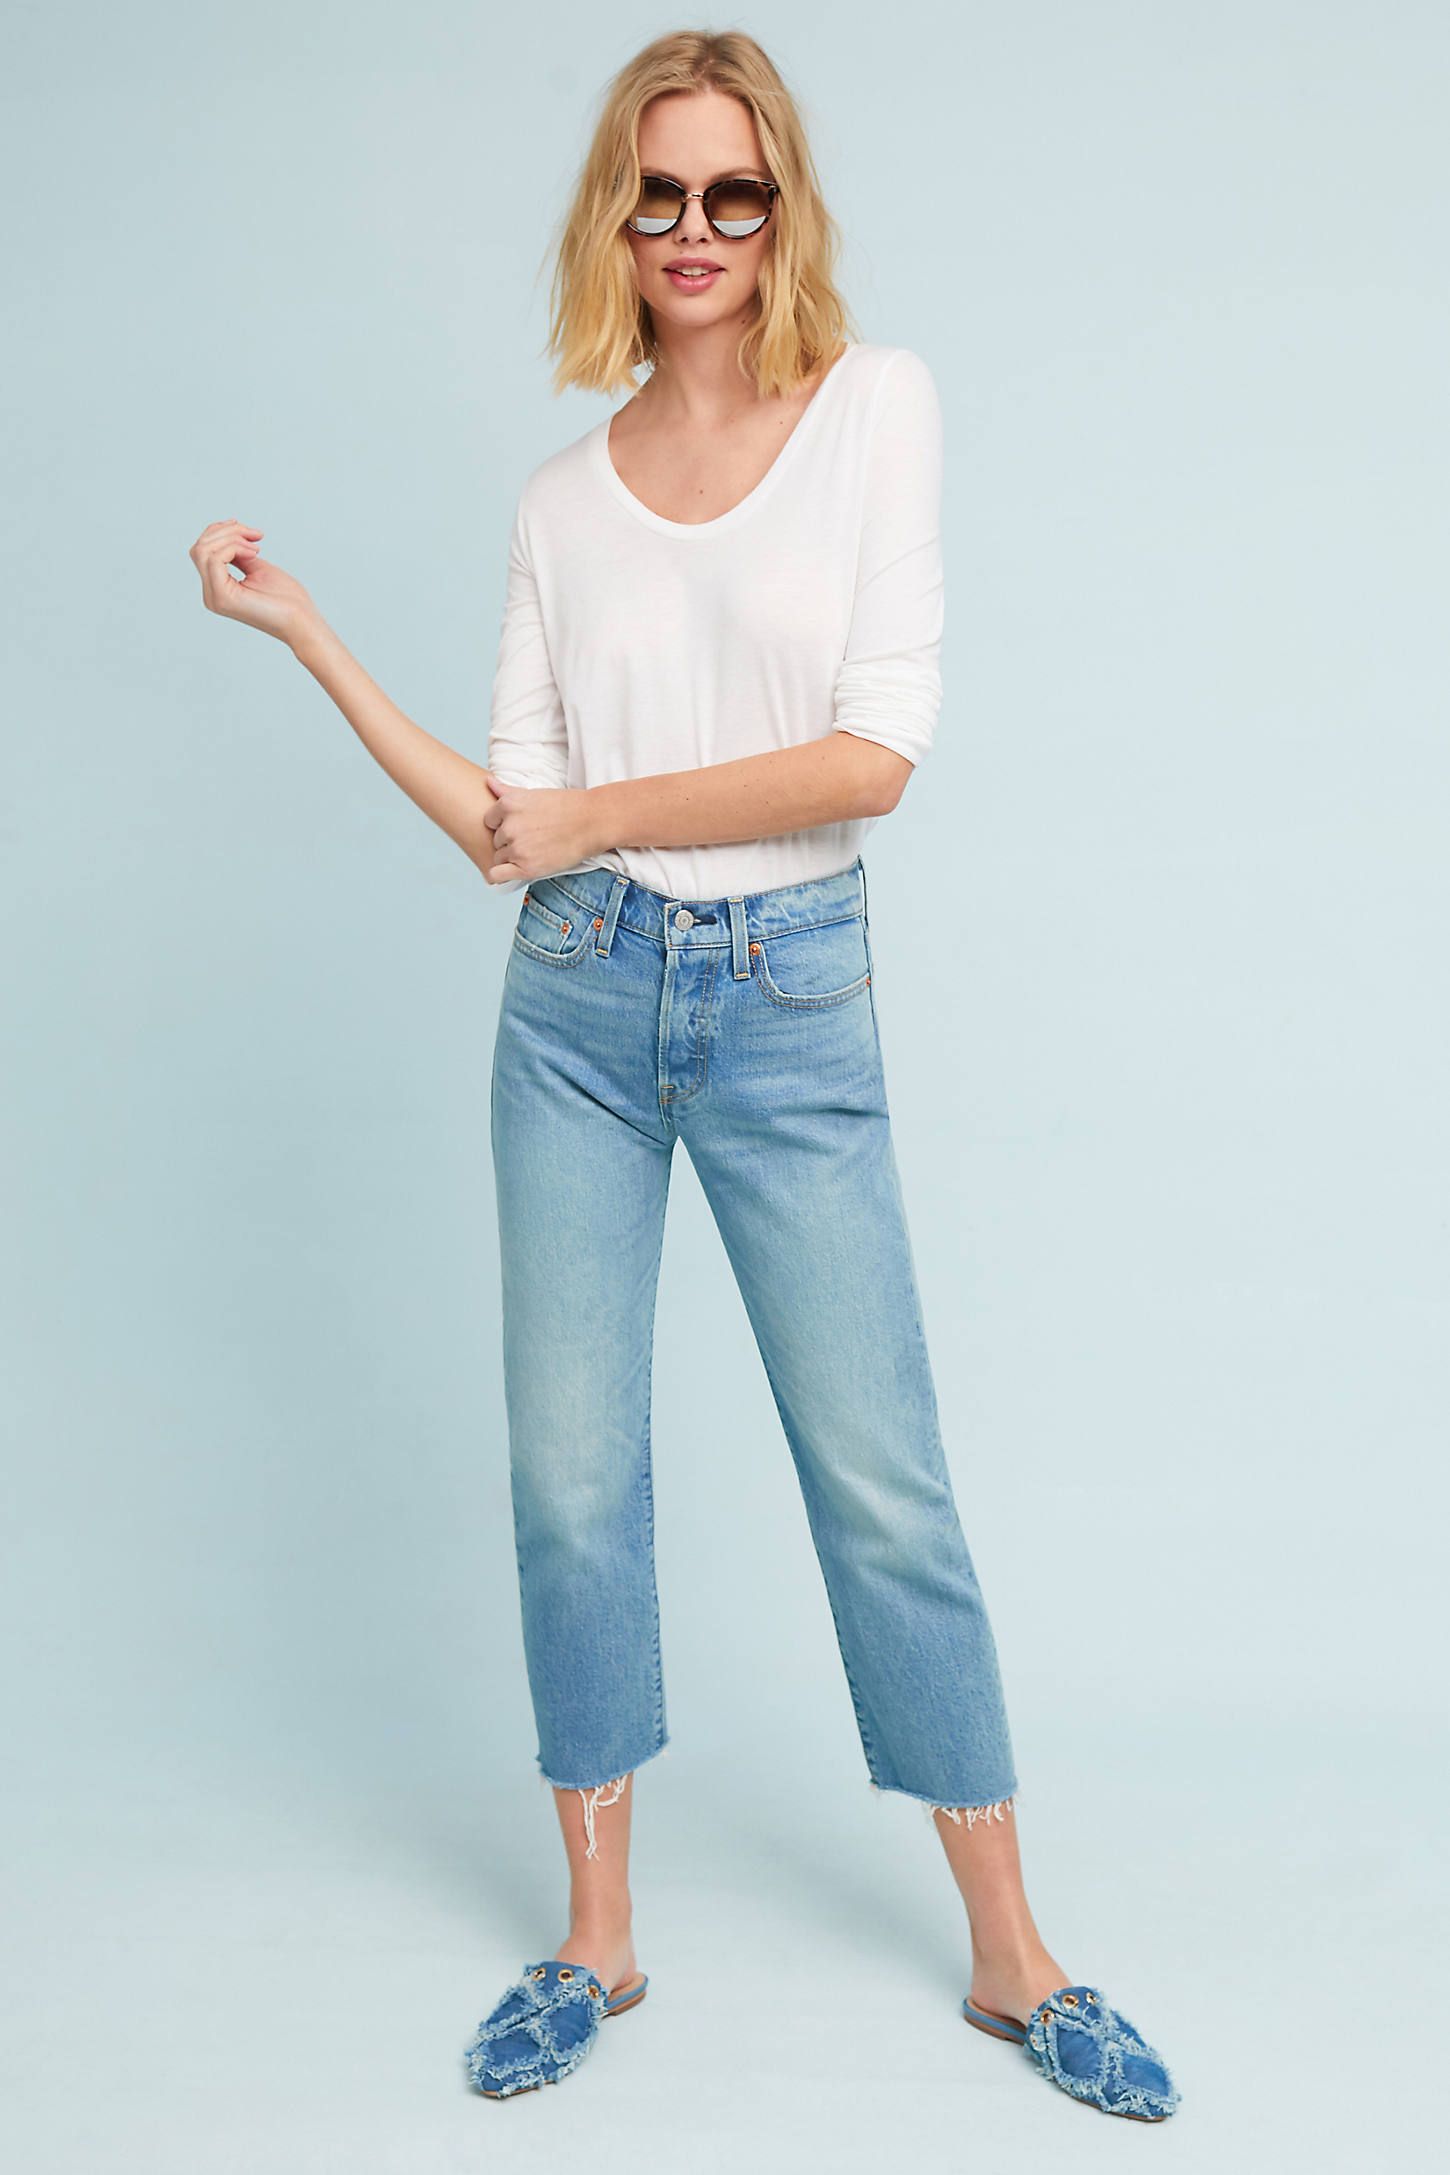 Levi's Wedgie High-Rise Straight Jeans | Anthropologie (US)